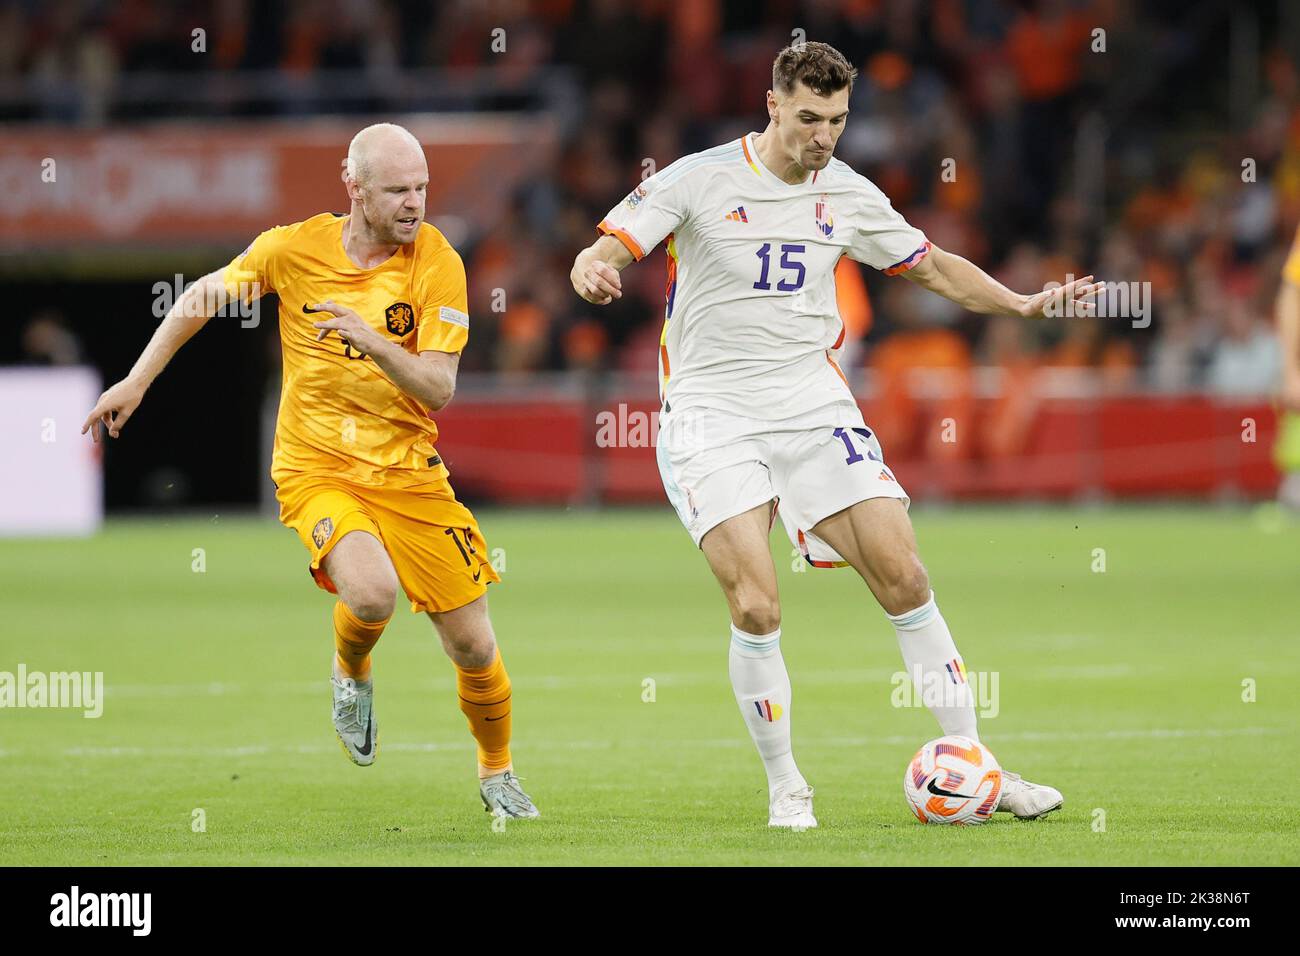 Netherlands' Davy Klaassen and Belgium's Thomas Meunier fight for the ball during a soccer game between the Netherlands and Belgian national team the Red Devils, Sunday 25 September 2022 in Amsterdam, the Netherlands, the sixth and last game in the Nations League A group stage. BELGA PHOTO BRUNO FAHY Stock Photo